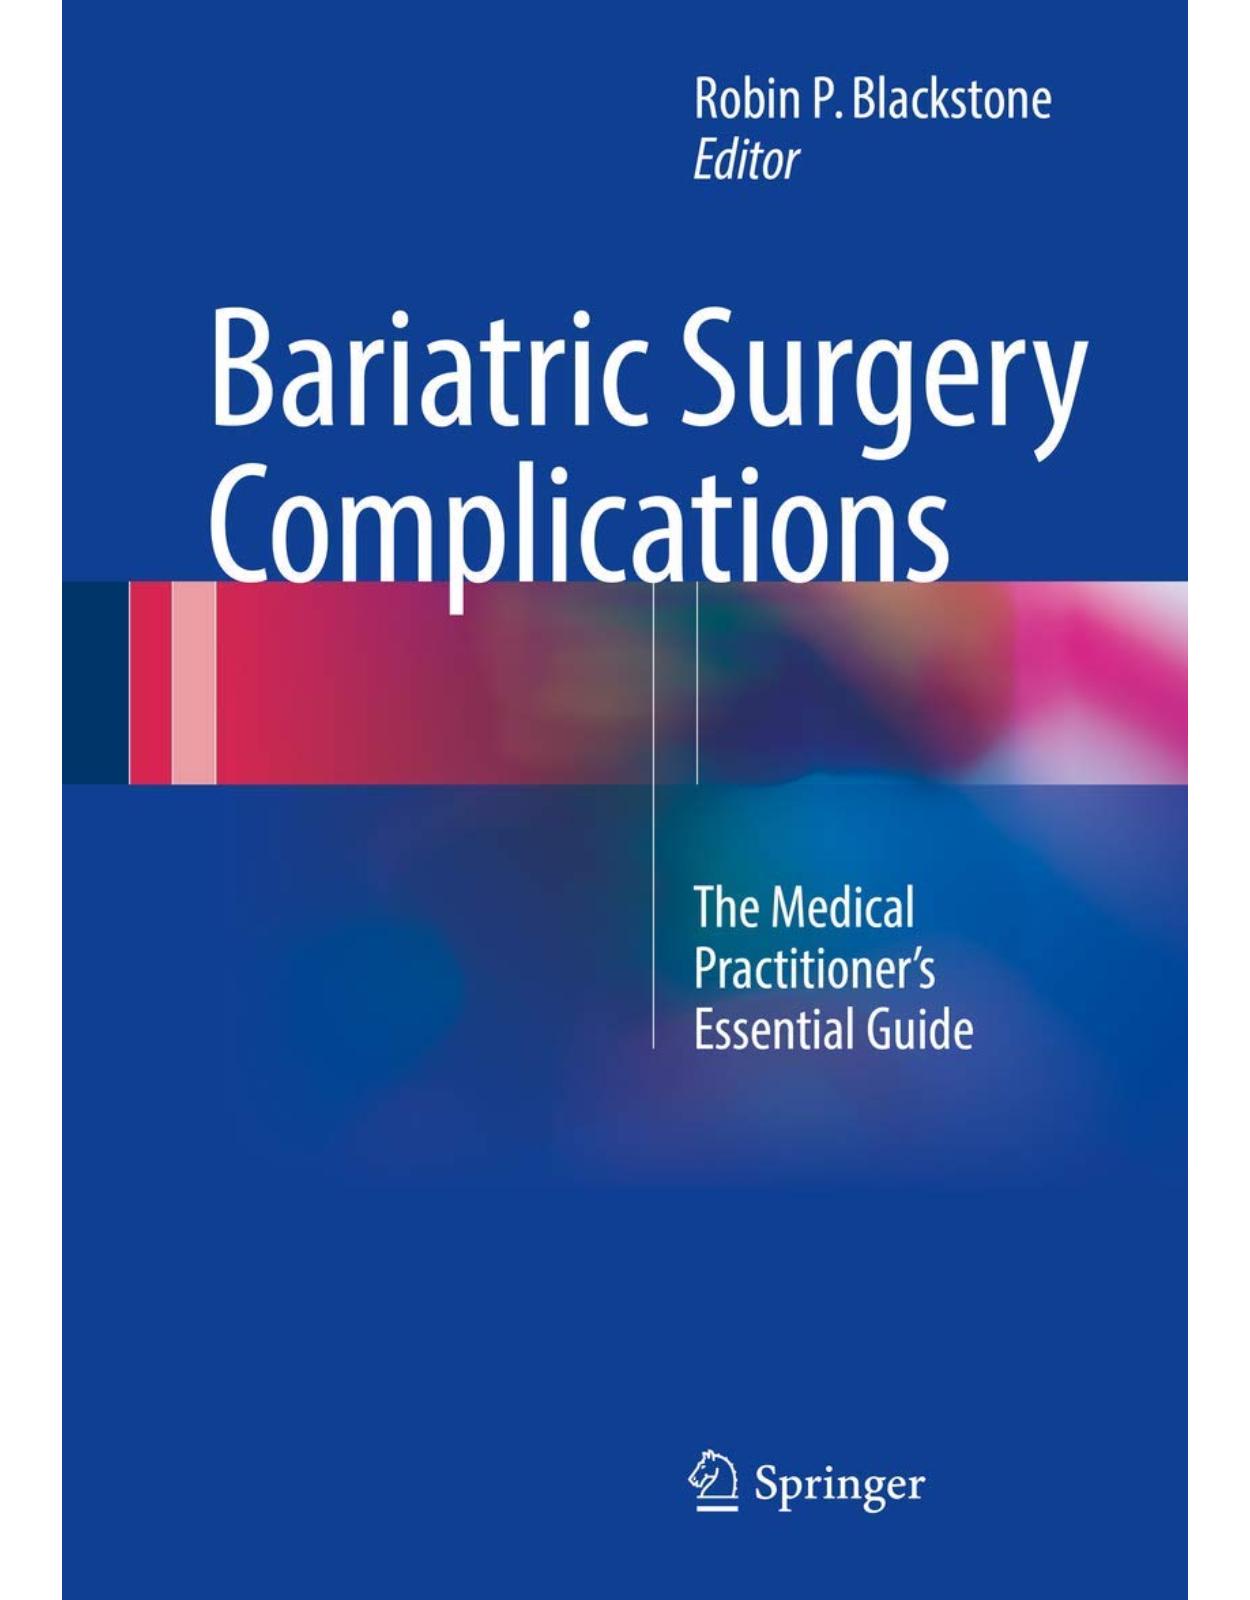 Bariatric Surgery Complications: The Medical Practitioner’s Essential Guide